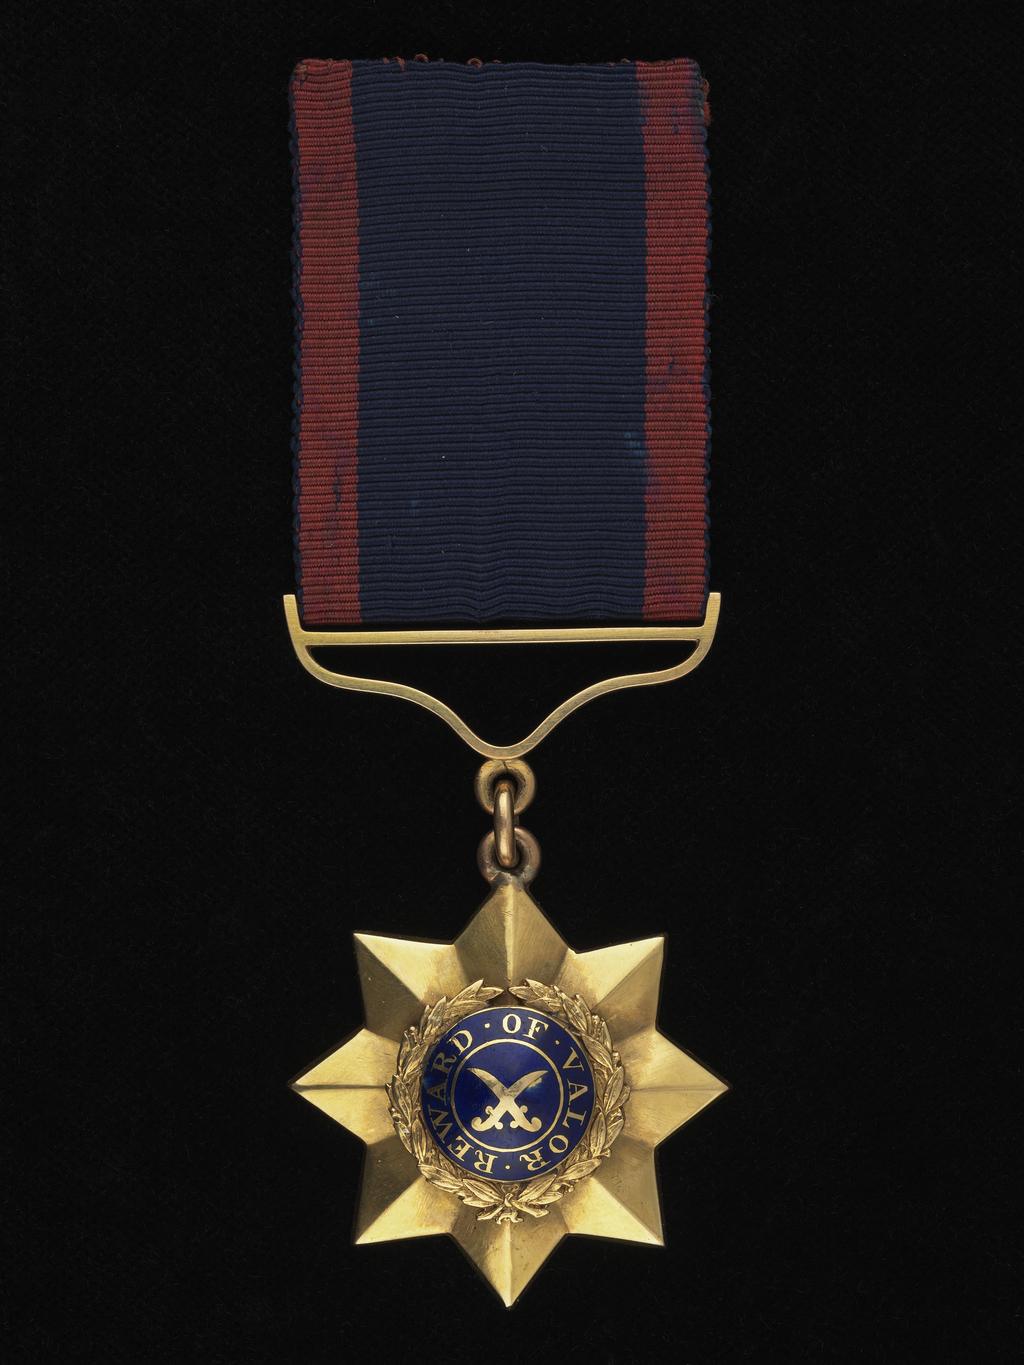 An image of Medal. Indian Order of Merit, 1st Class. Calcutta mint. East India Company. Indian Army. Obverse: REWARD OF VALOR; Blue boss with crossed swords in circle with lettering around, all in gilt; wreath around and eight star points. Reverse: 1st Class; Eight-pointed star, plain save inscription. Gold, struck, weight 50.93,g, diameter 40.6 mm, 1837-1911. Notes: The Indian Order of Merit, instituted by the Honourable East India Company in 1837, is the oldest award for gallantry of the British Empire. The Order had three classes until 1912, for which medals were awarded in silver, silver and gold and gold respectively, and promotion from one class to a higher was achieved by further acts of bravery. The receipient of this medal must therefore have been awarded the Order's medal three times at some point between 1837 and 1912, when Indian troops were made eligible for the Victoria Cross thus displacing the original first class, but as the medals were issued unnamed, we do not know who the recipient was. Lester Watson purchased the medal from the London dealers Baldwin in 1927.